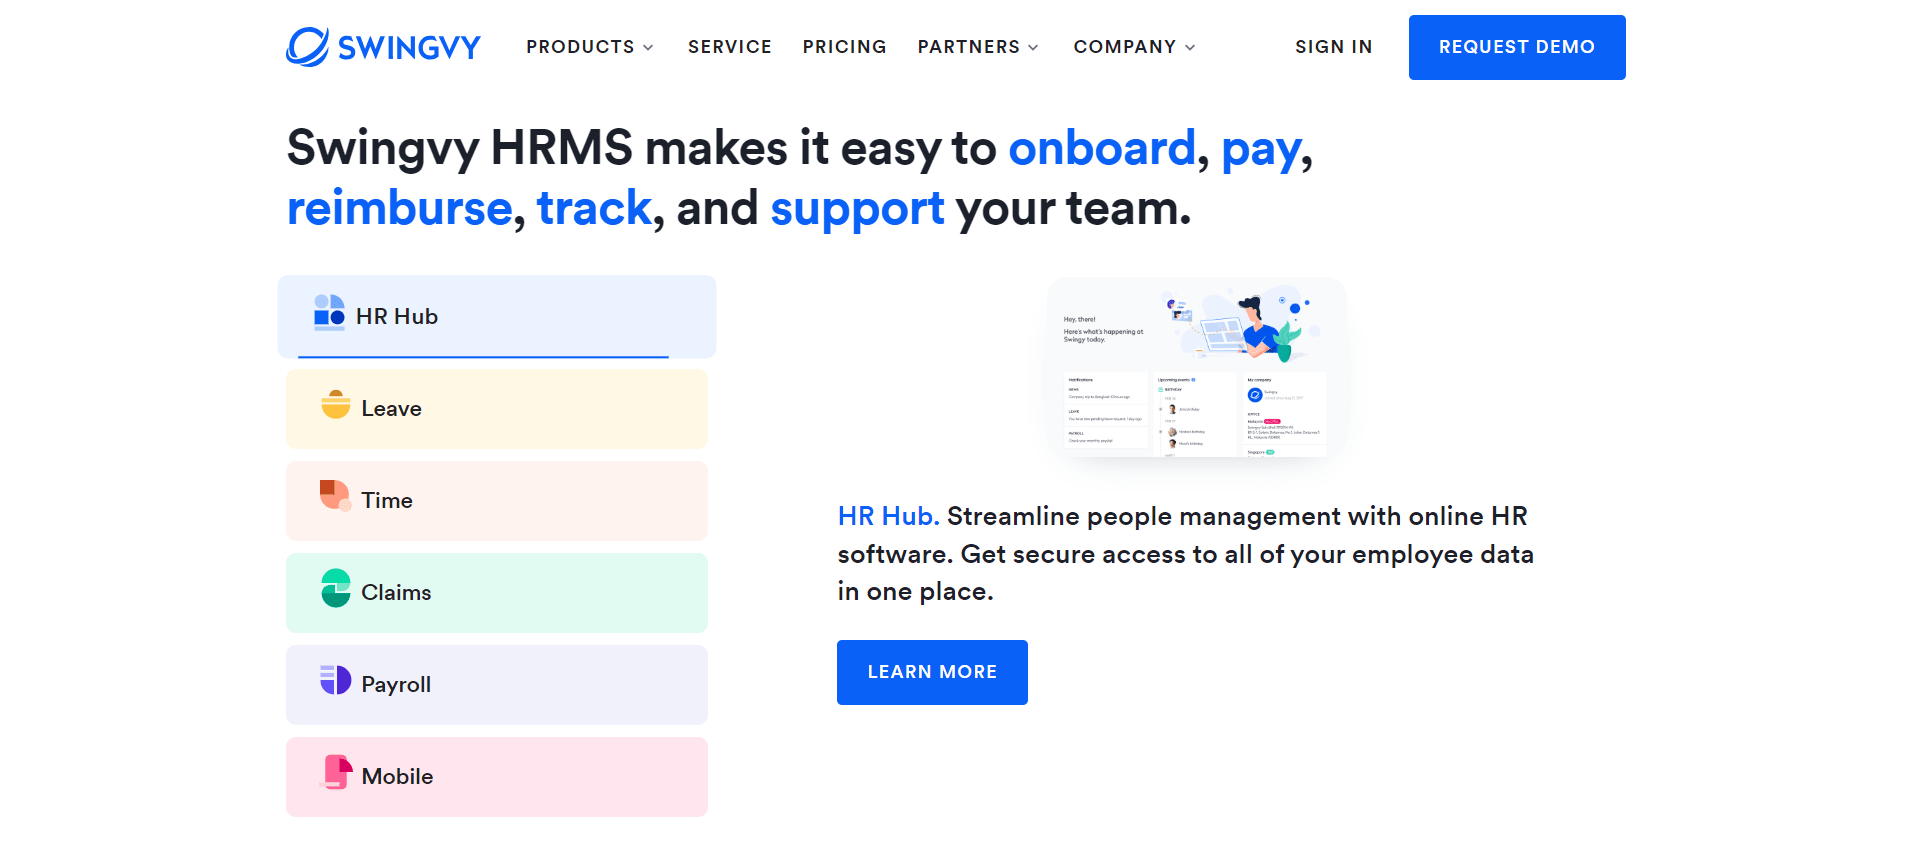 Hompage of Swingvy HRMS Website mentioning what it makes easy for HR professionals in Malaysia 